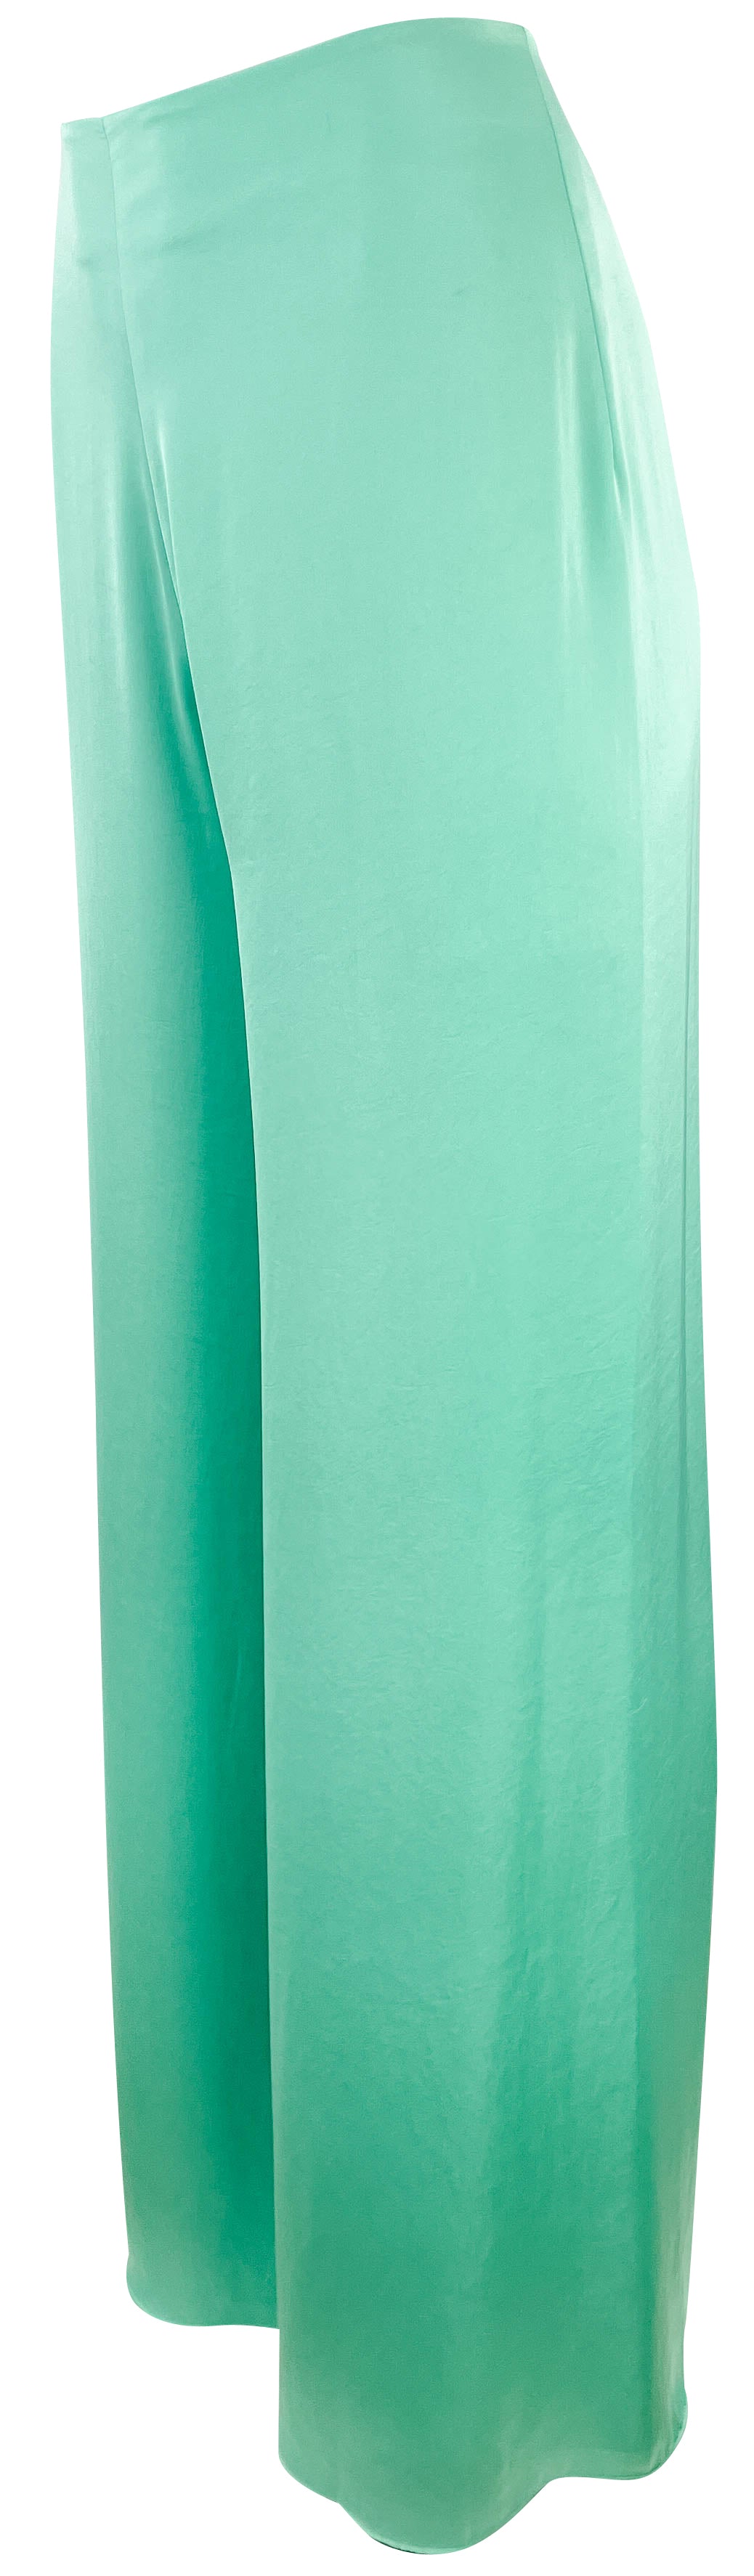 Alexis Wisdom Pant in French Green - Discounts on Alexis at UAL